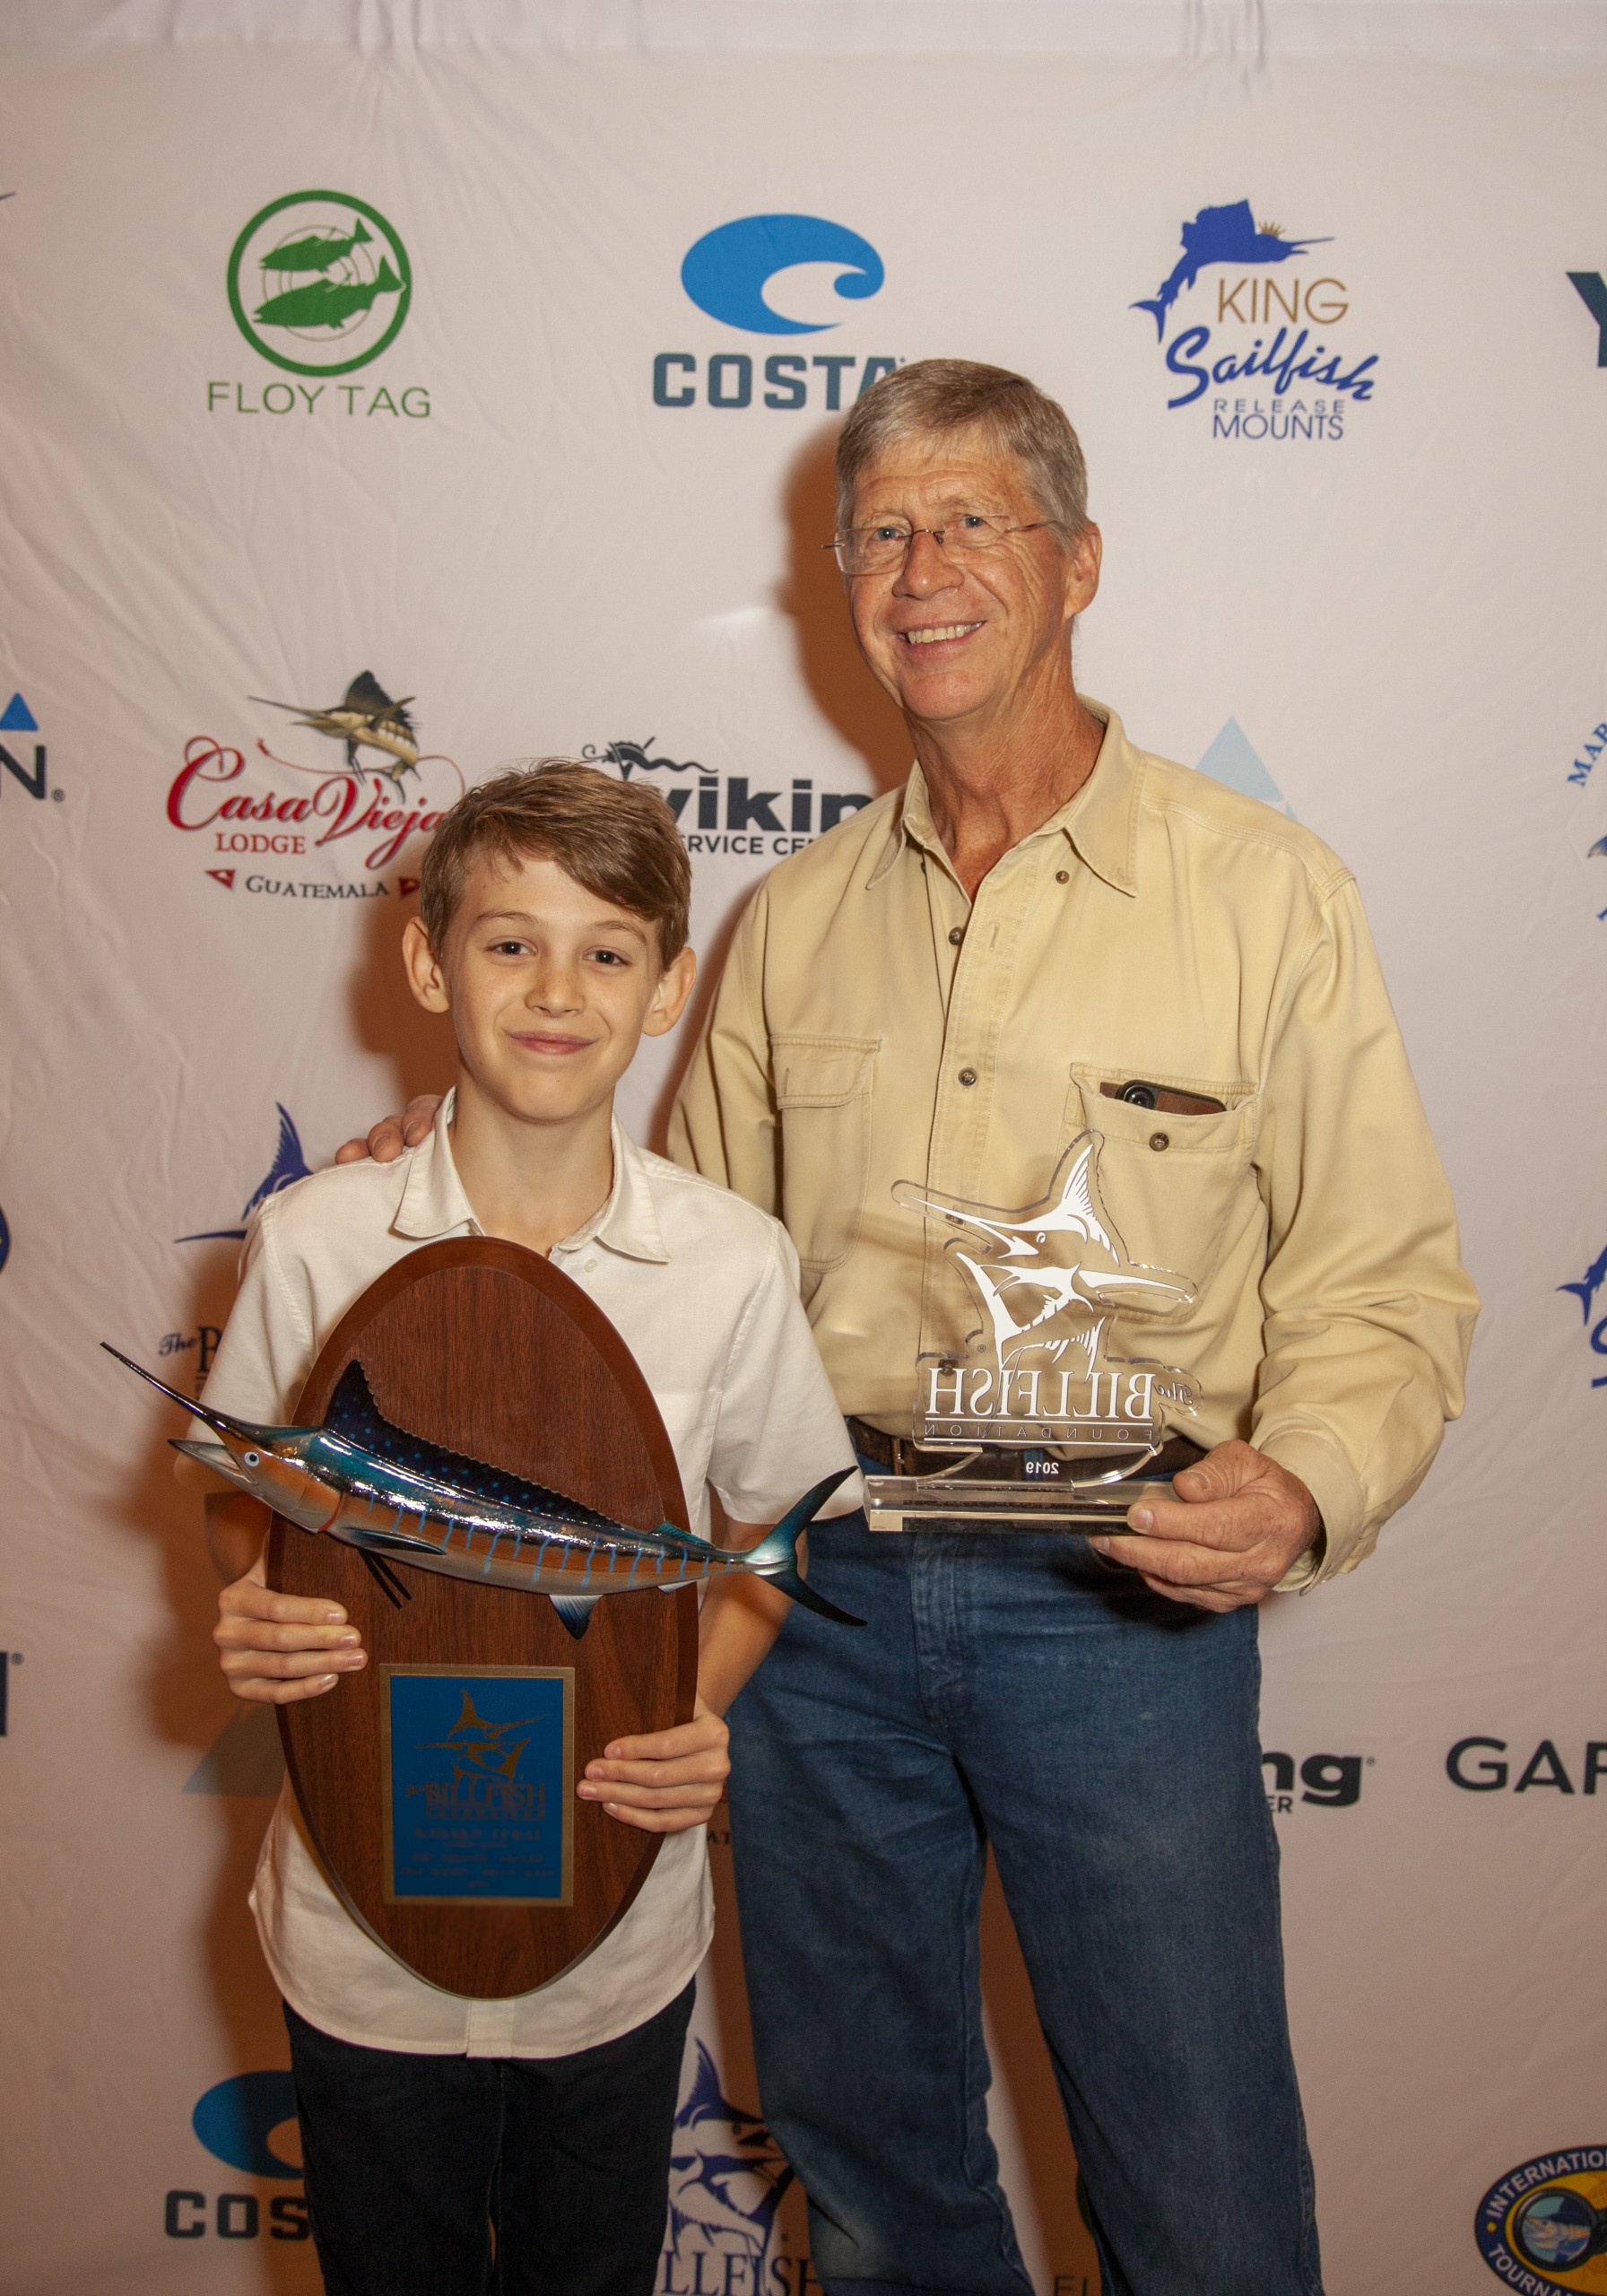 Brycen Oquin (left, youth winner) and his grandfather.